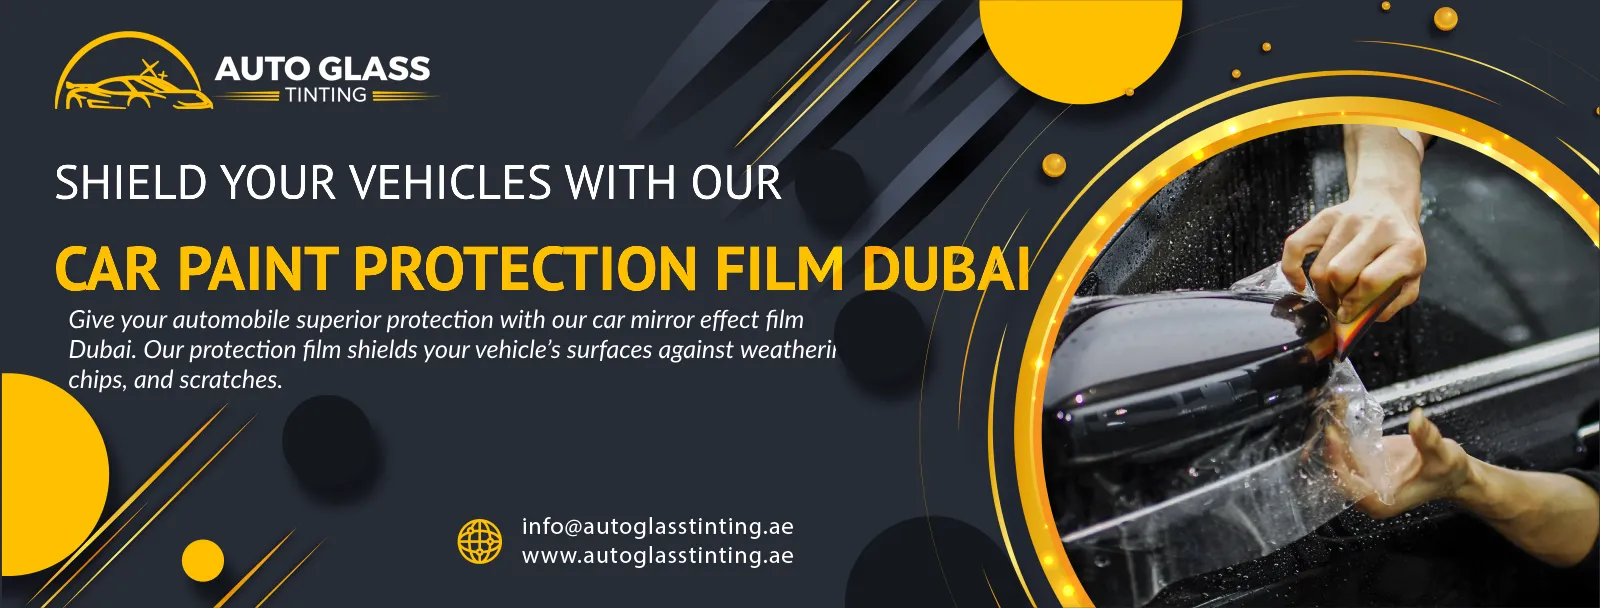 Affordable Car Paint Protection Film